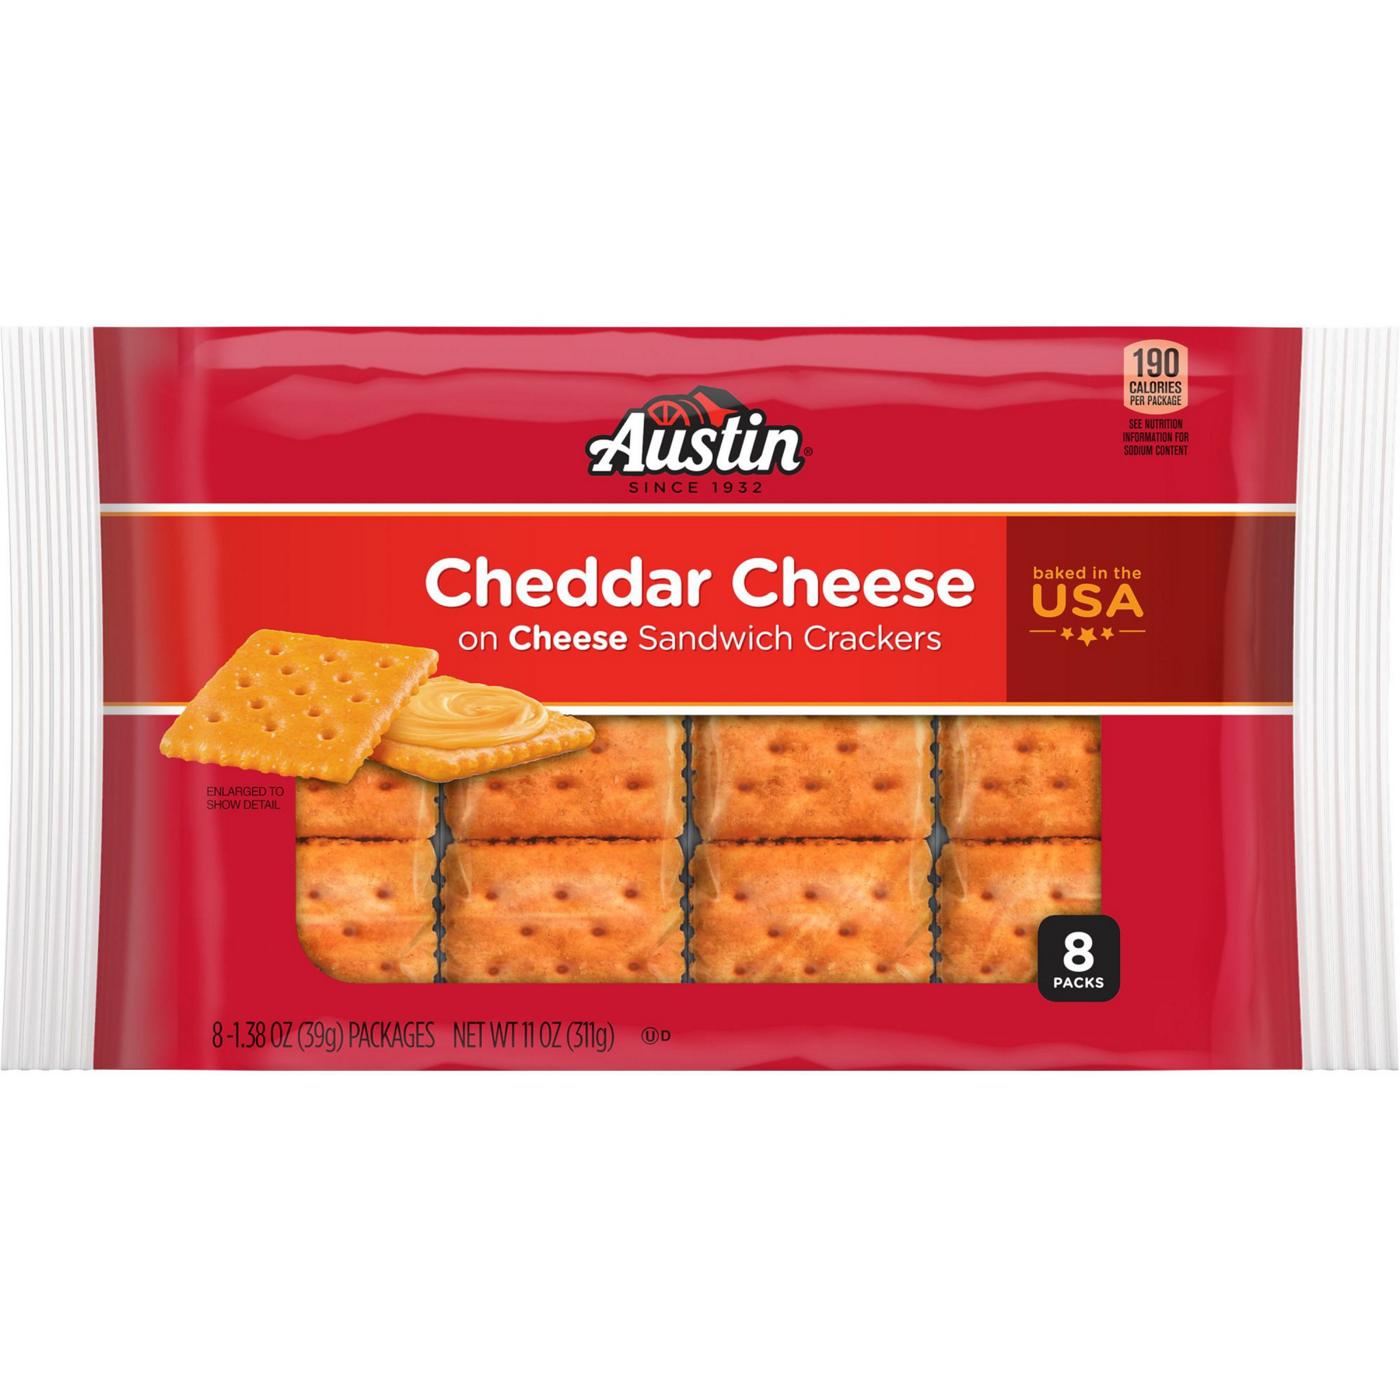 Austin Cheddar Cheese on Cheese Sandwich Crackers; image 1 of 4